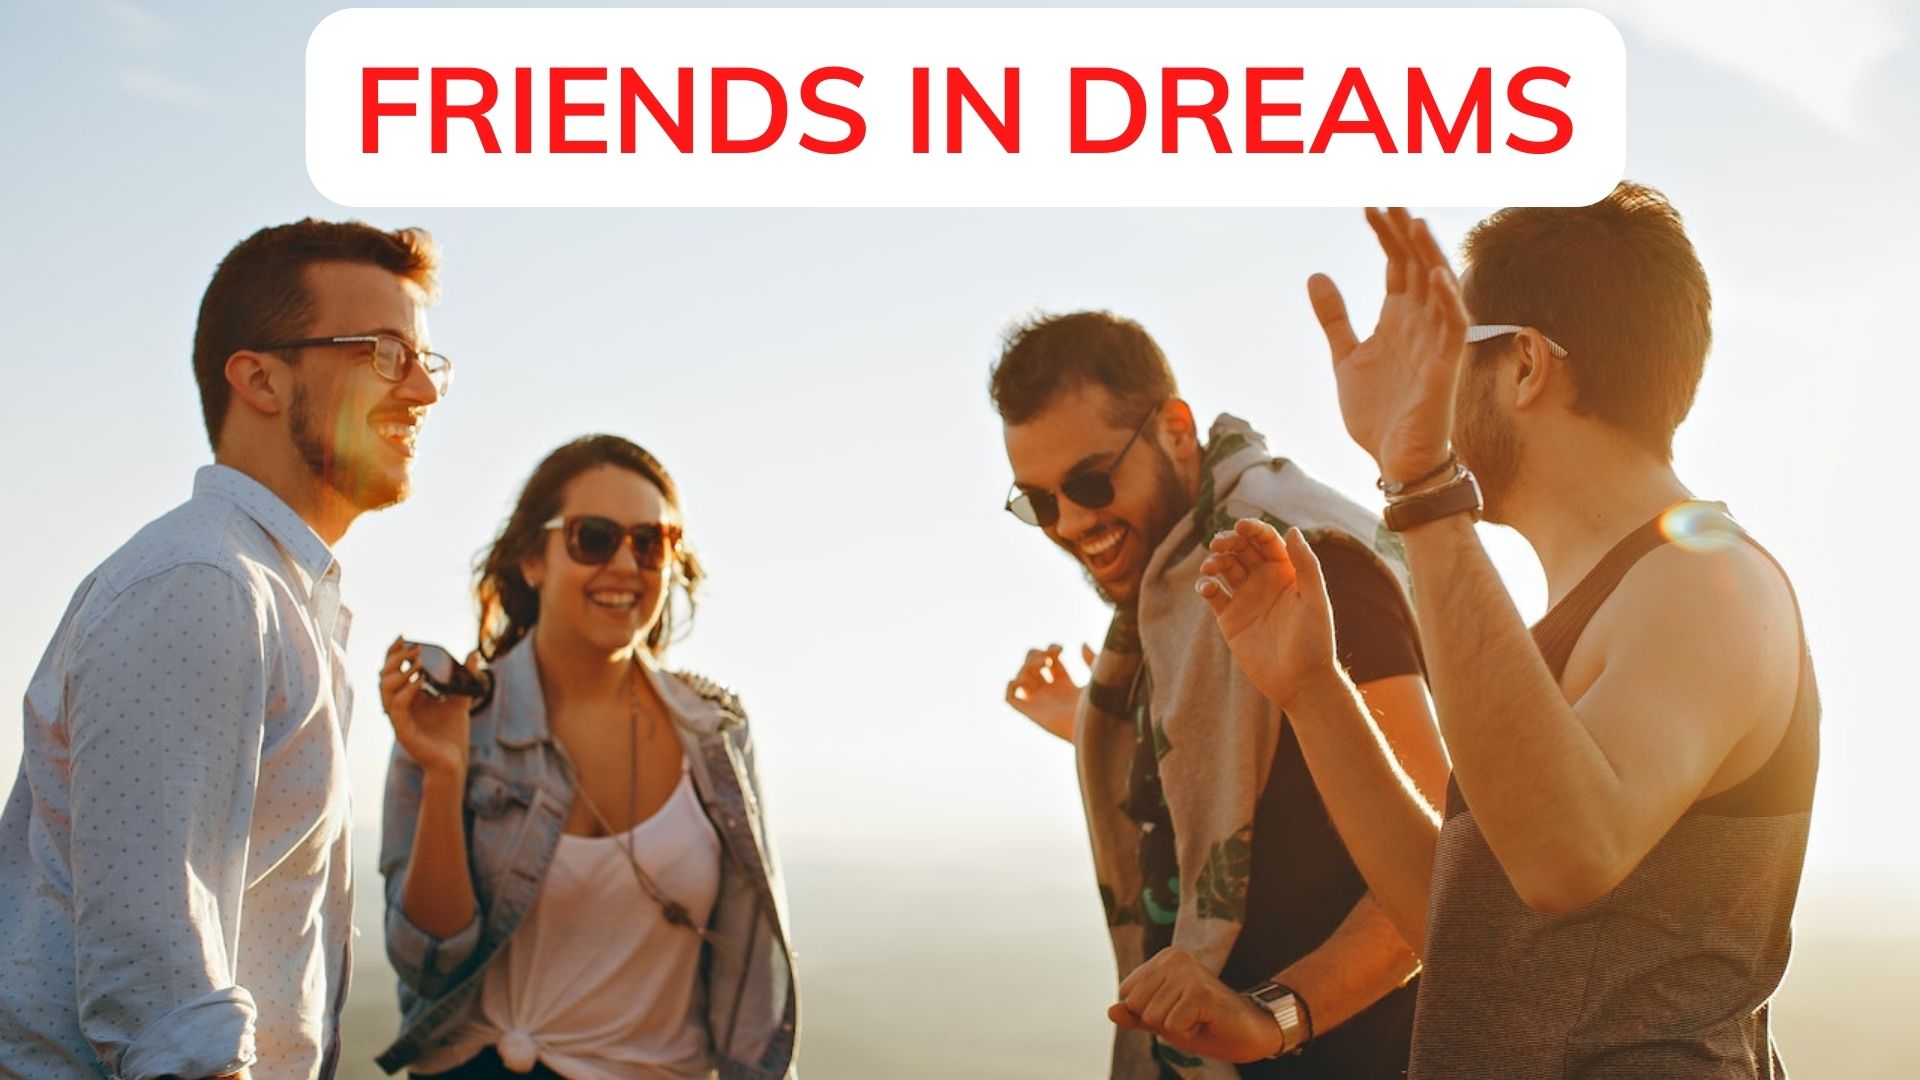 Friends In Dreams - Reflect Worries And Fears About A Friend